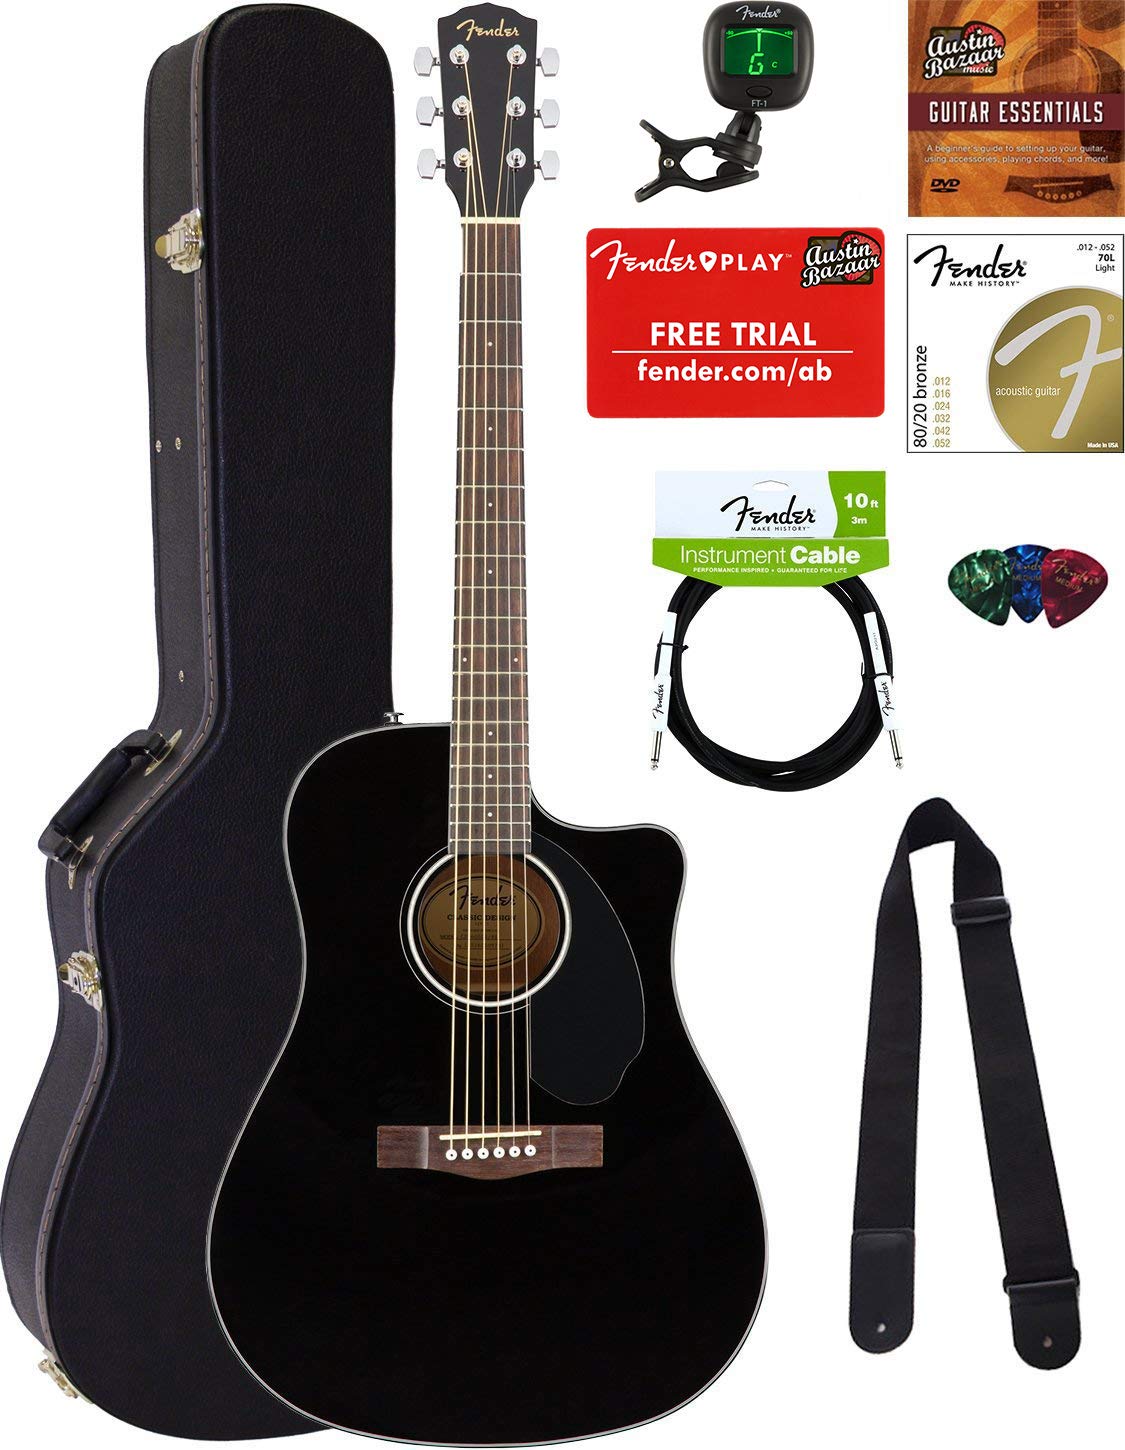 Fender CD-60SCE Dreadnought Acoustic-Electric Guitar - Black Bundle with Hard Case, Tuner, Strap, Strings, Picks, Instructional DVD, Polishing Cloth